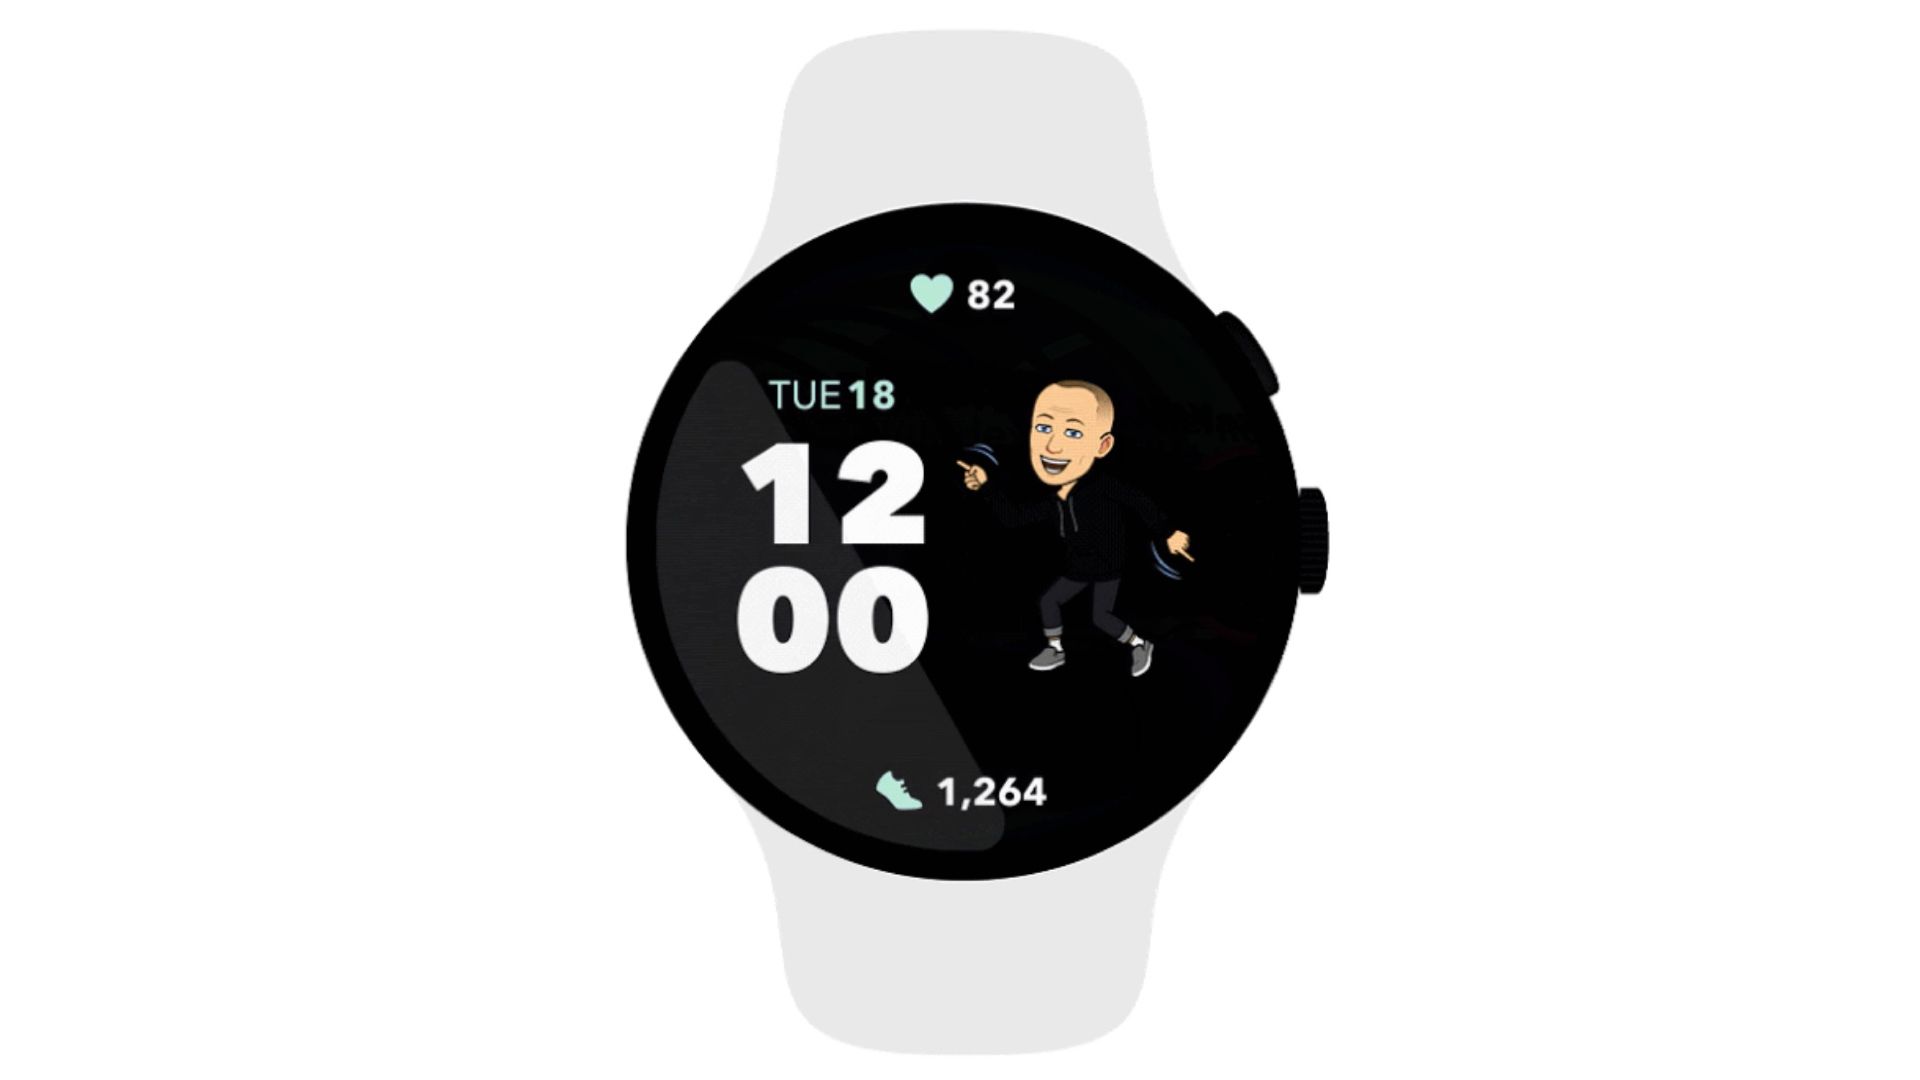 Samsung and Google Wear OS watch redesign